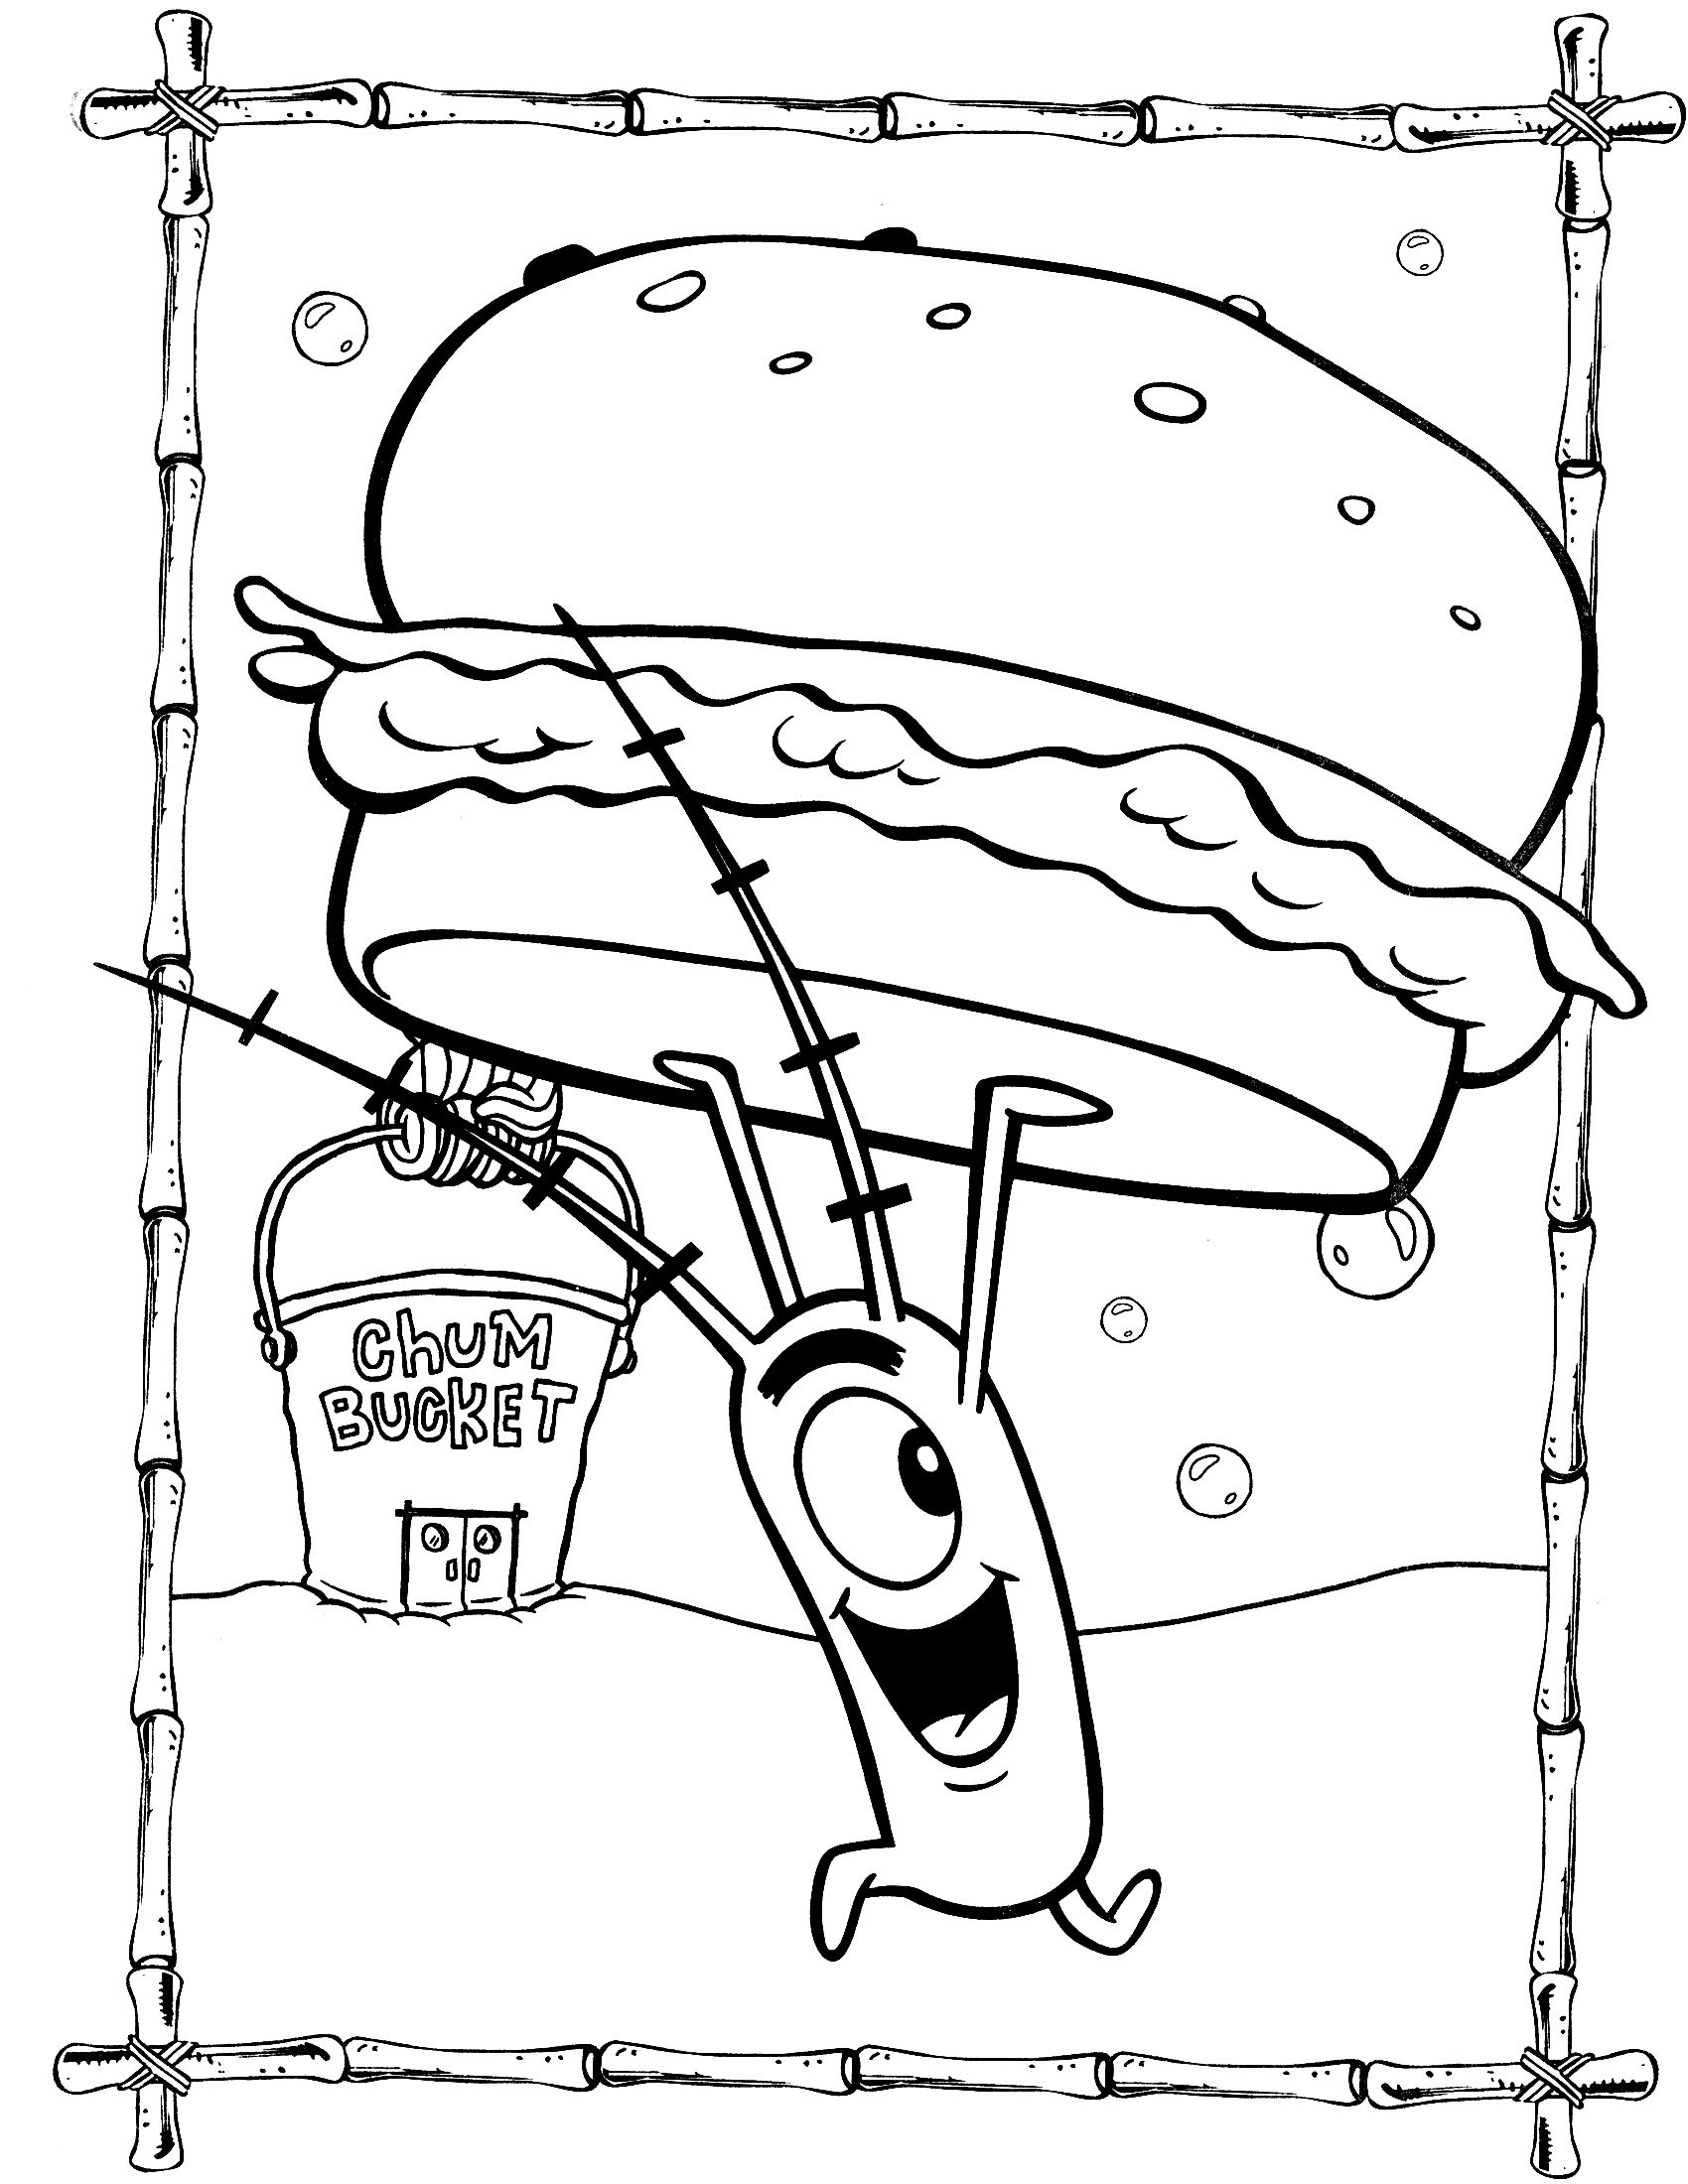 Funny Spongebob Coloring Pages Printables 16